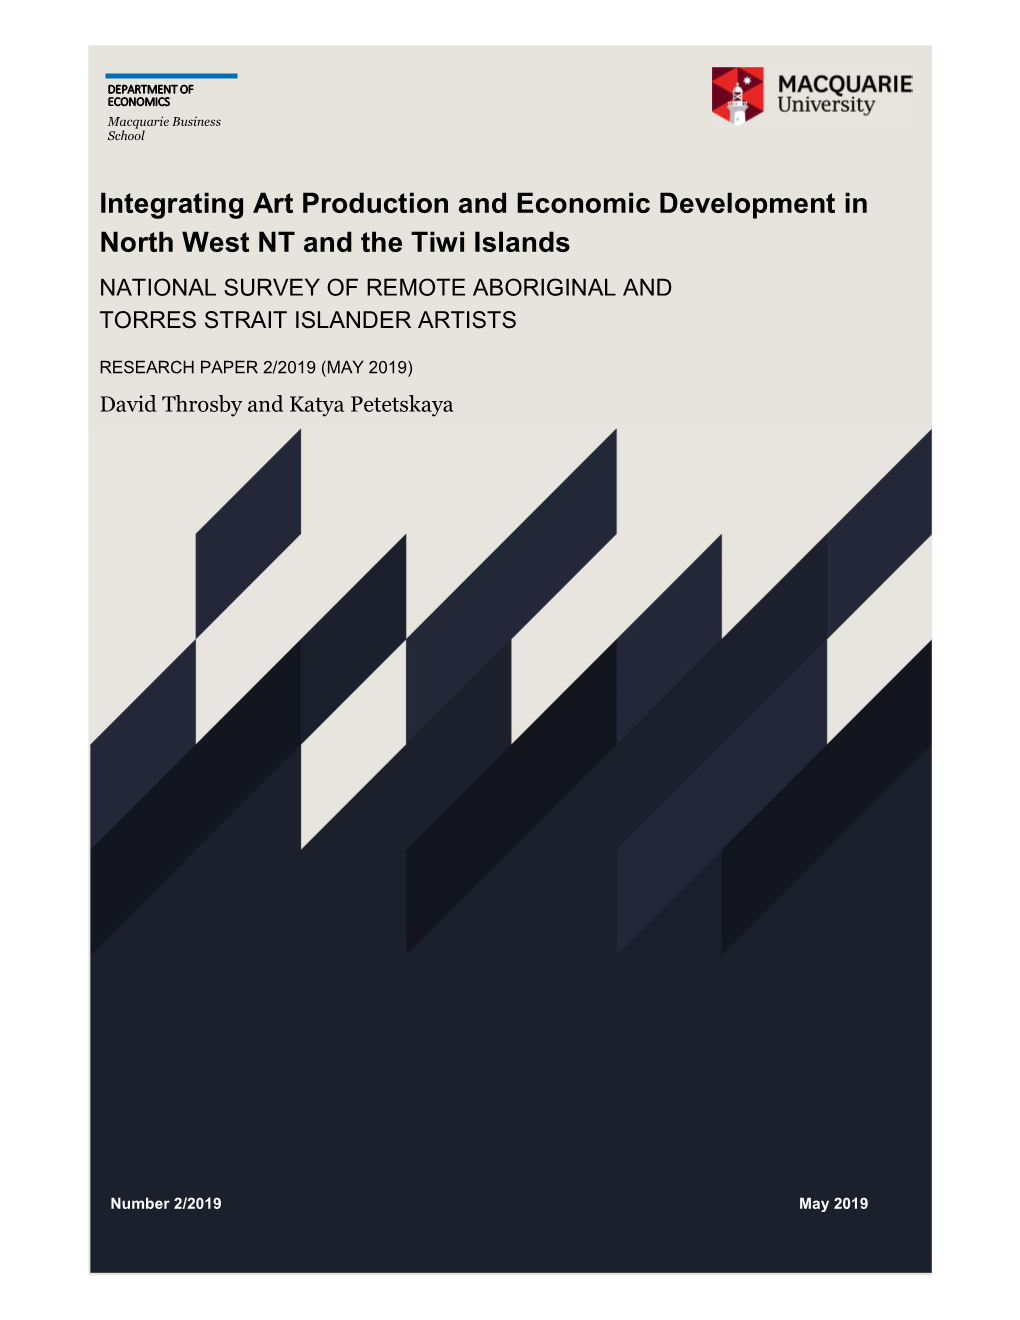 Integrating Art Production and Economic Development in North West NT and the Tiwi Islands NATIONAL SURVEY of REMOTE ABORIGINAL and TORRES STRAIT ISLANDER ARTISTS